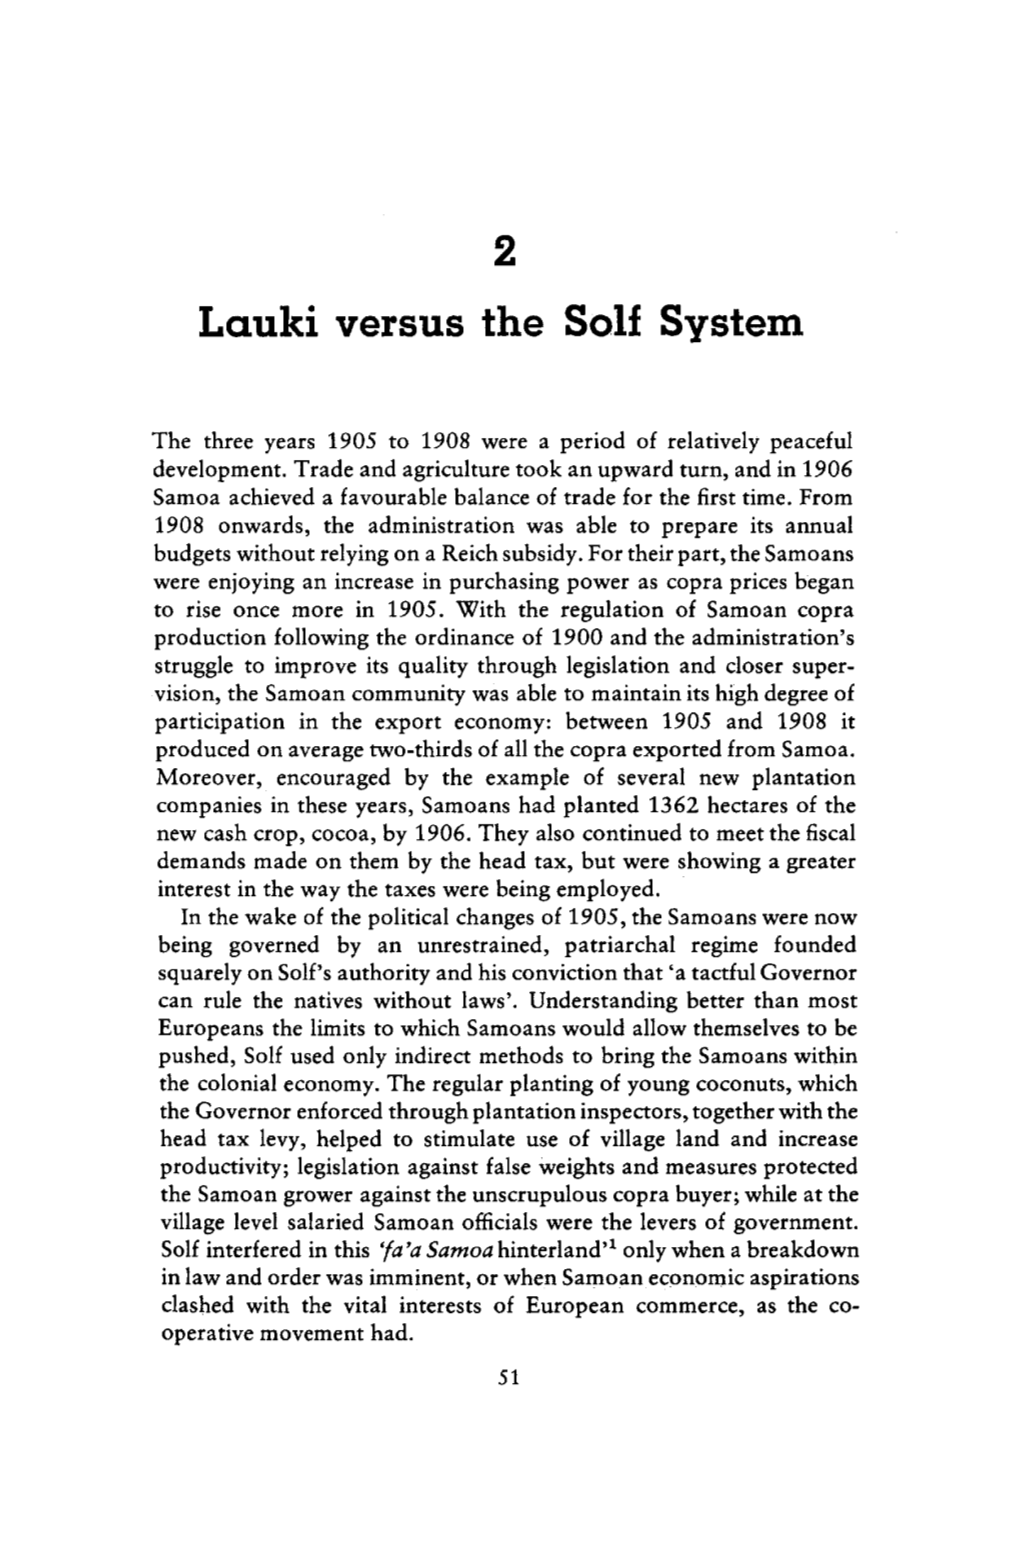 Lauaki Versus the Solf System Freehold Sales Or at Least to Permit Long-Term Leases